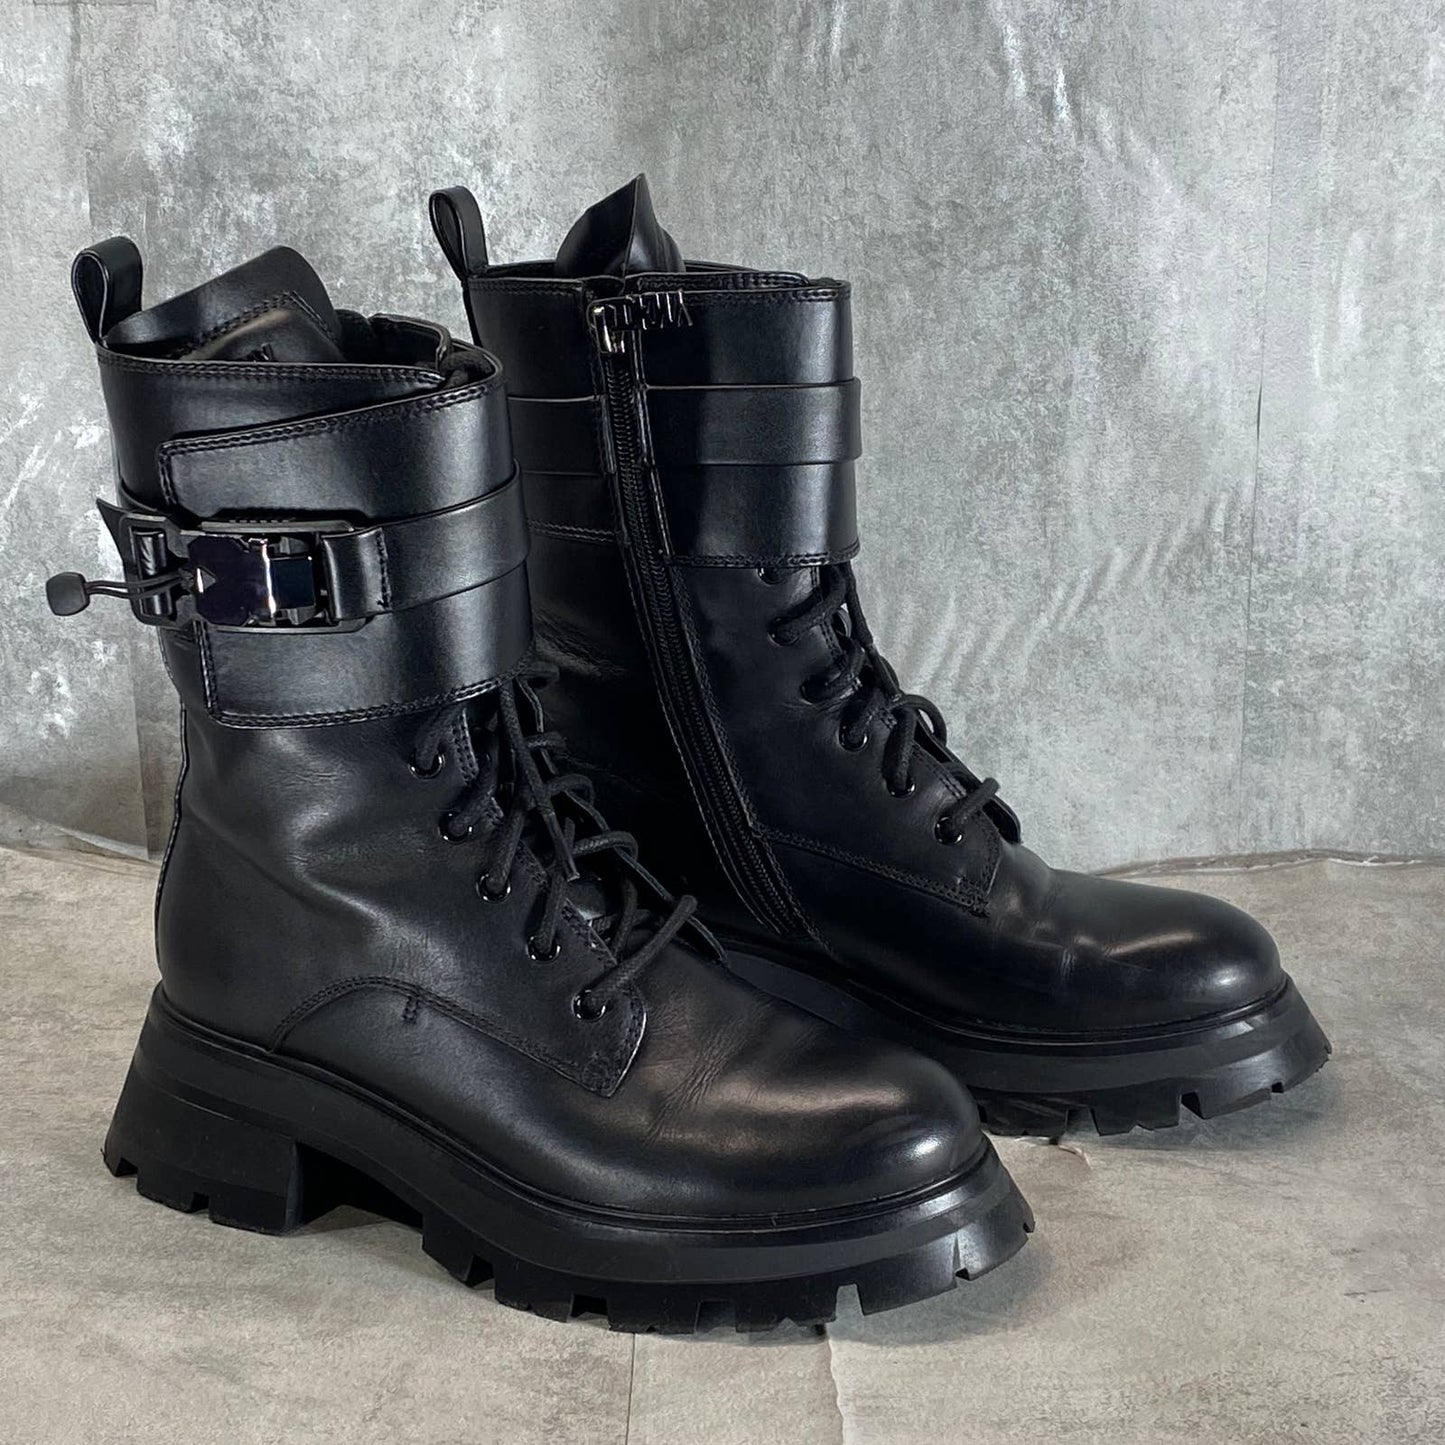 DKNY Women's Black Smooth Sava Buckled Combat Lace-Up Lug-Sole Boots SZ 8